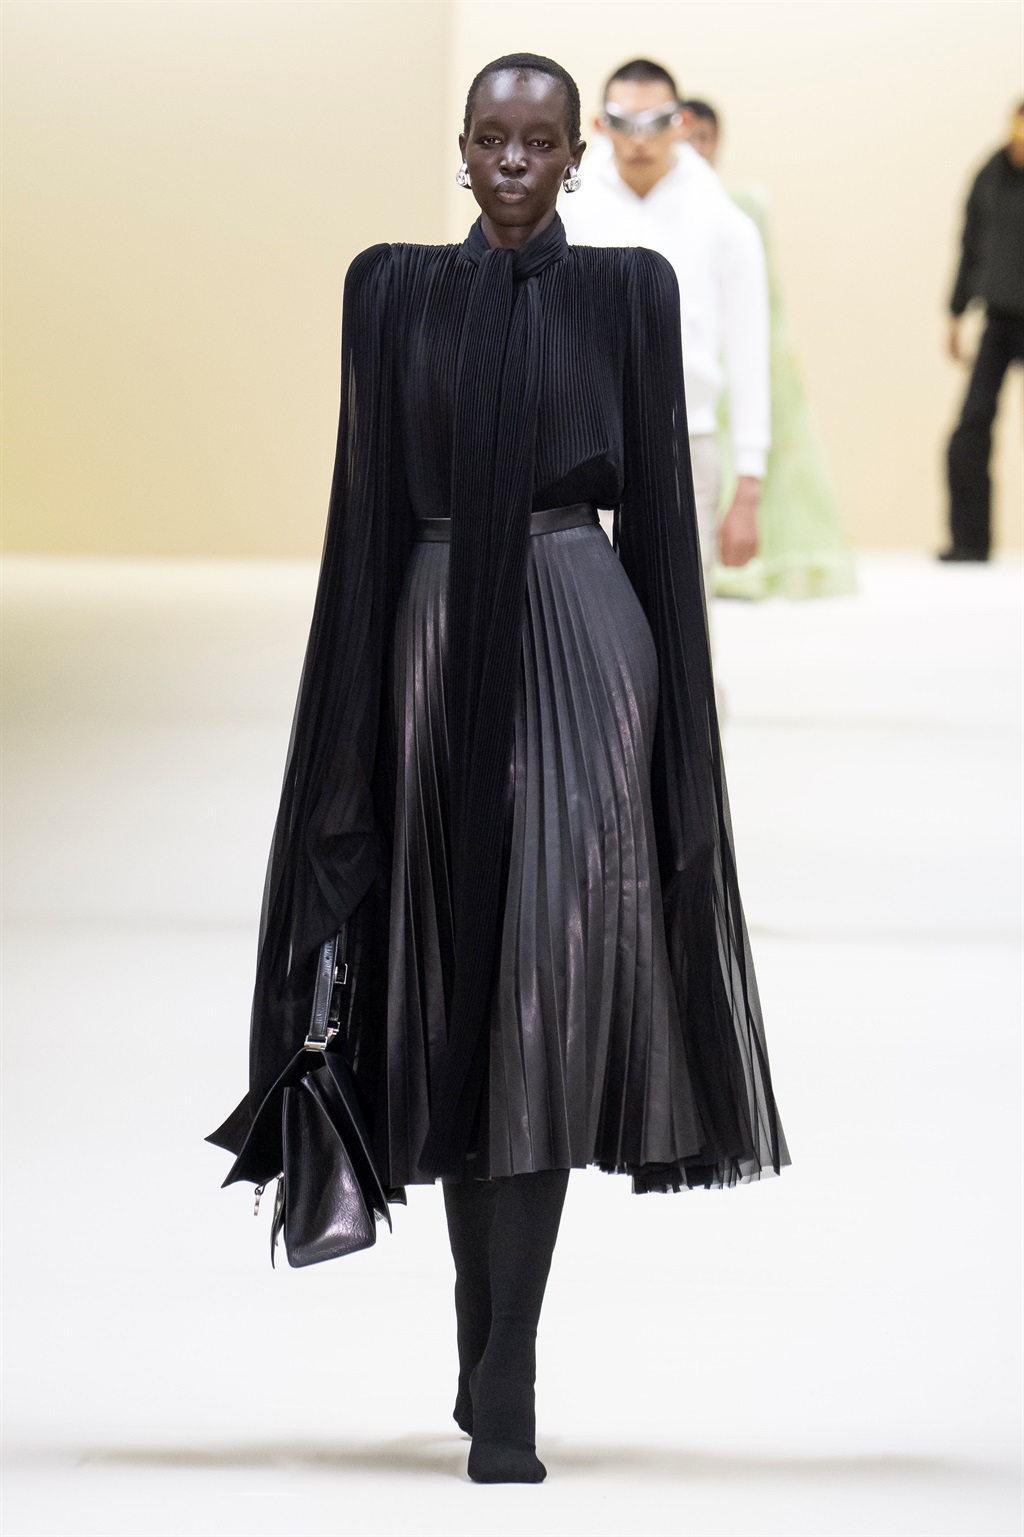 Paris Fashion Week Review Balenciaga Offers Just Clothes and Contrition   The New York Times